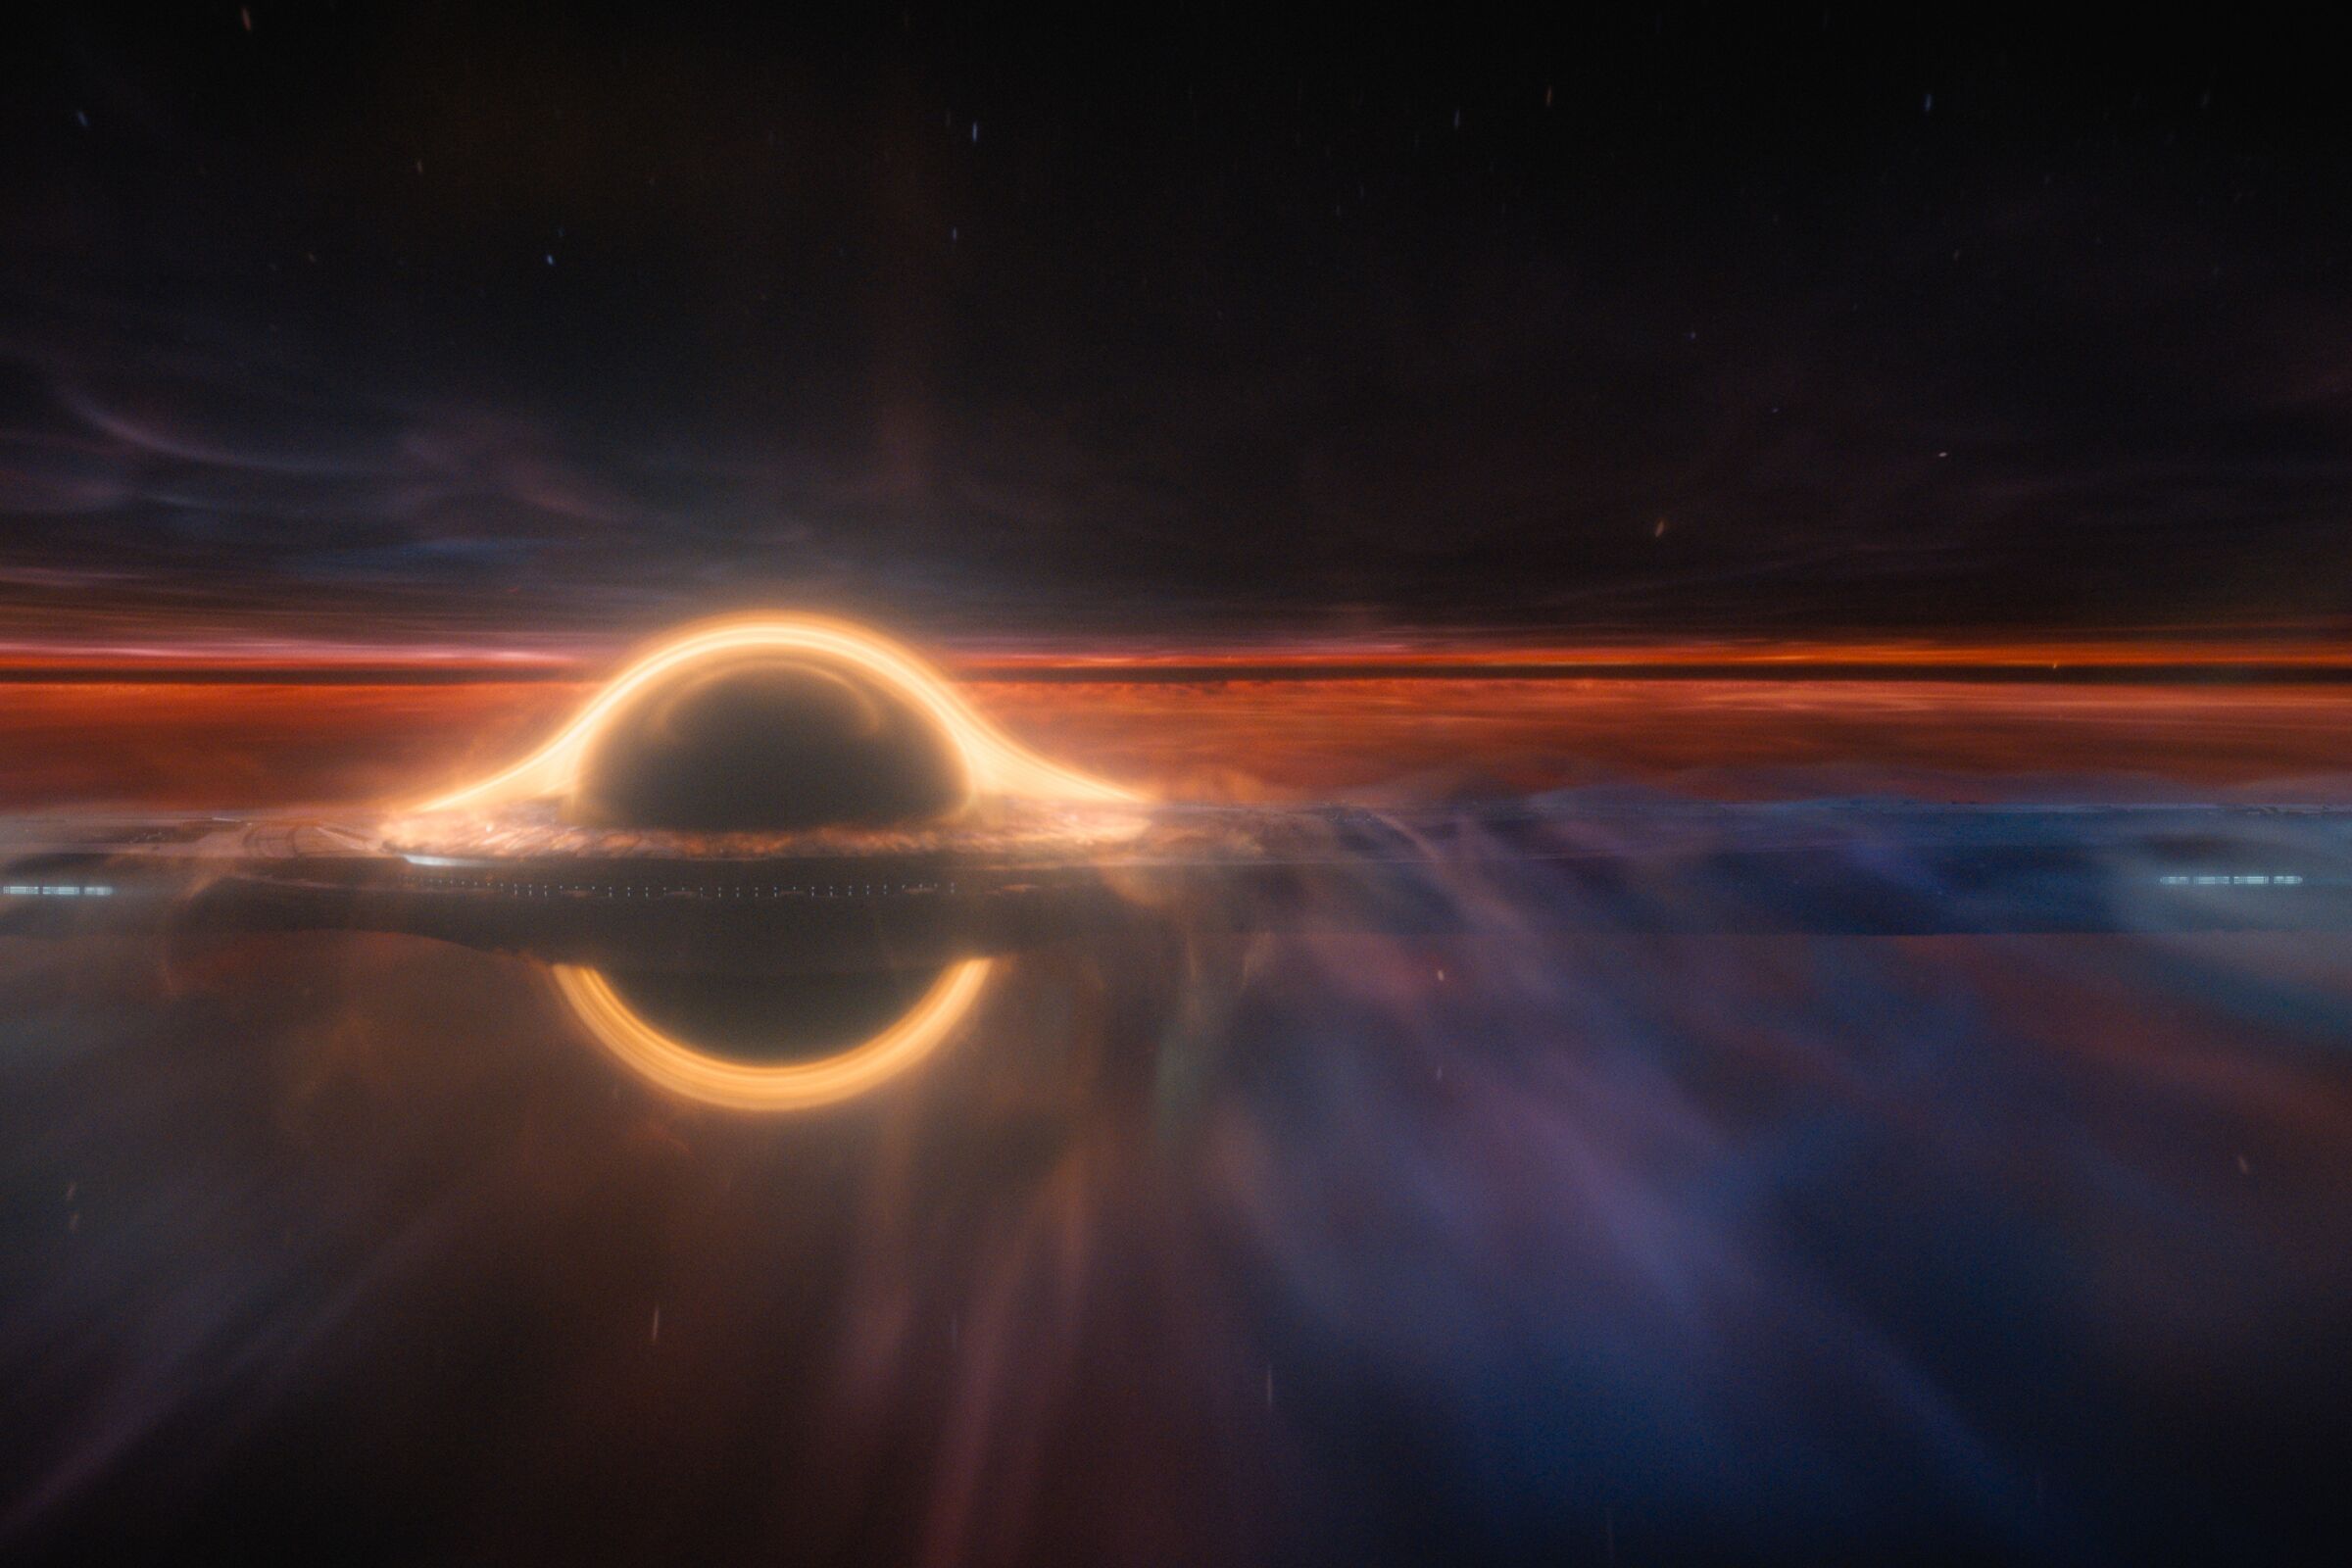 An outer space scene with clouds and a bright ring of light from "Foundation."